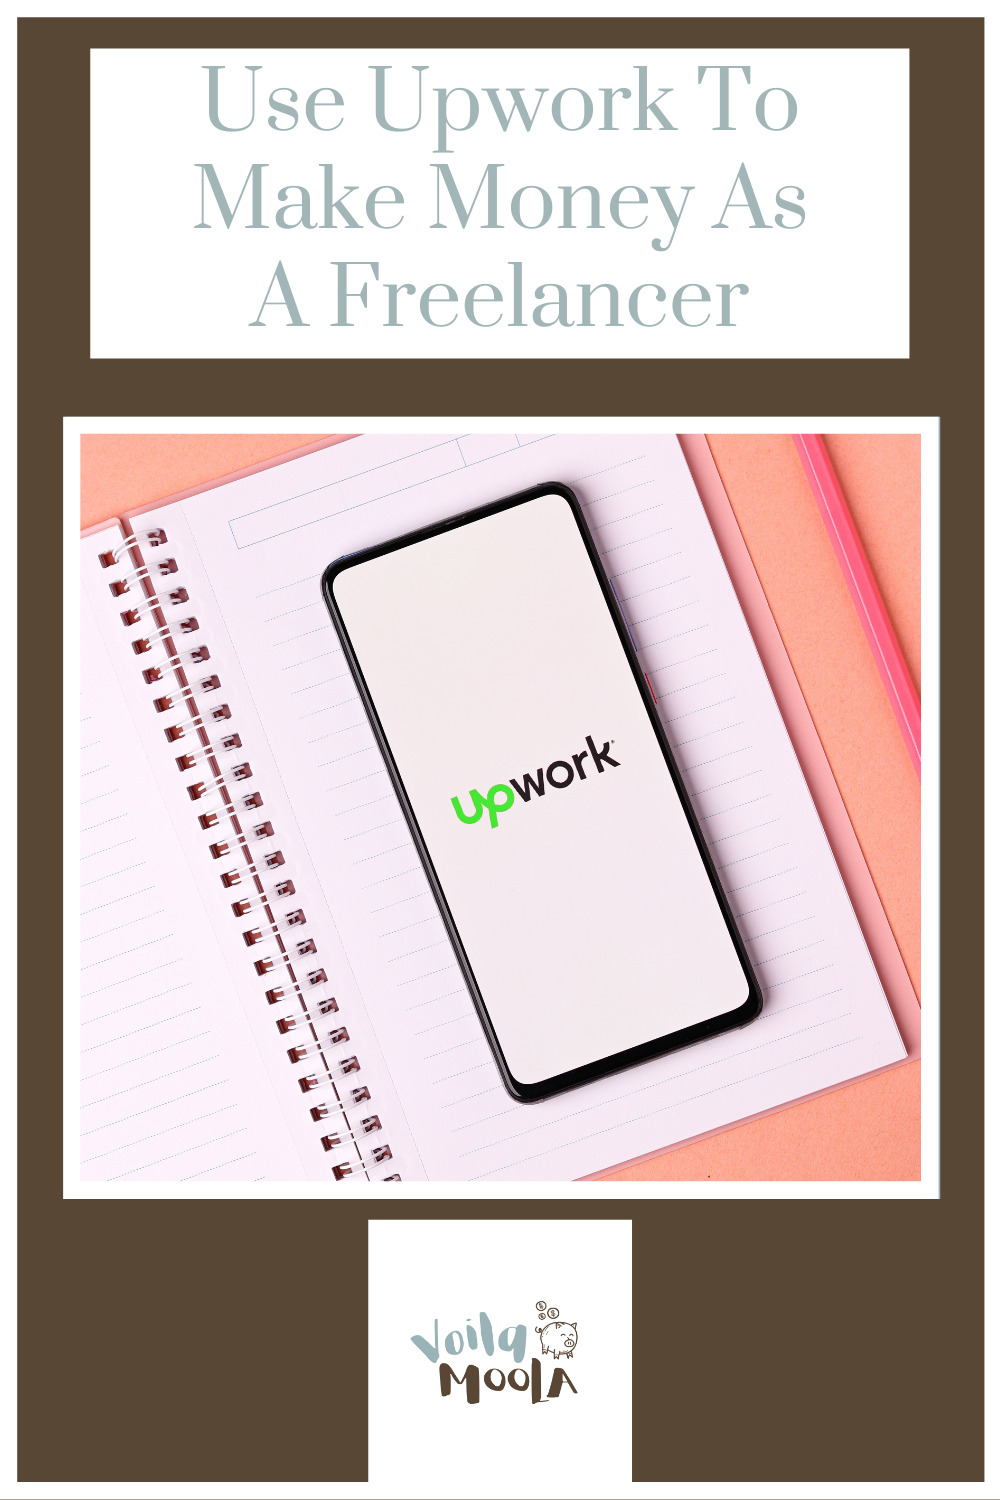 Voilamoola.com will help you earn and save more cash than ever before! Find ways to take control of your finances and stop stressing over money! If you have freelancing capabilities, discover how to find jobs through Upwork!